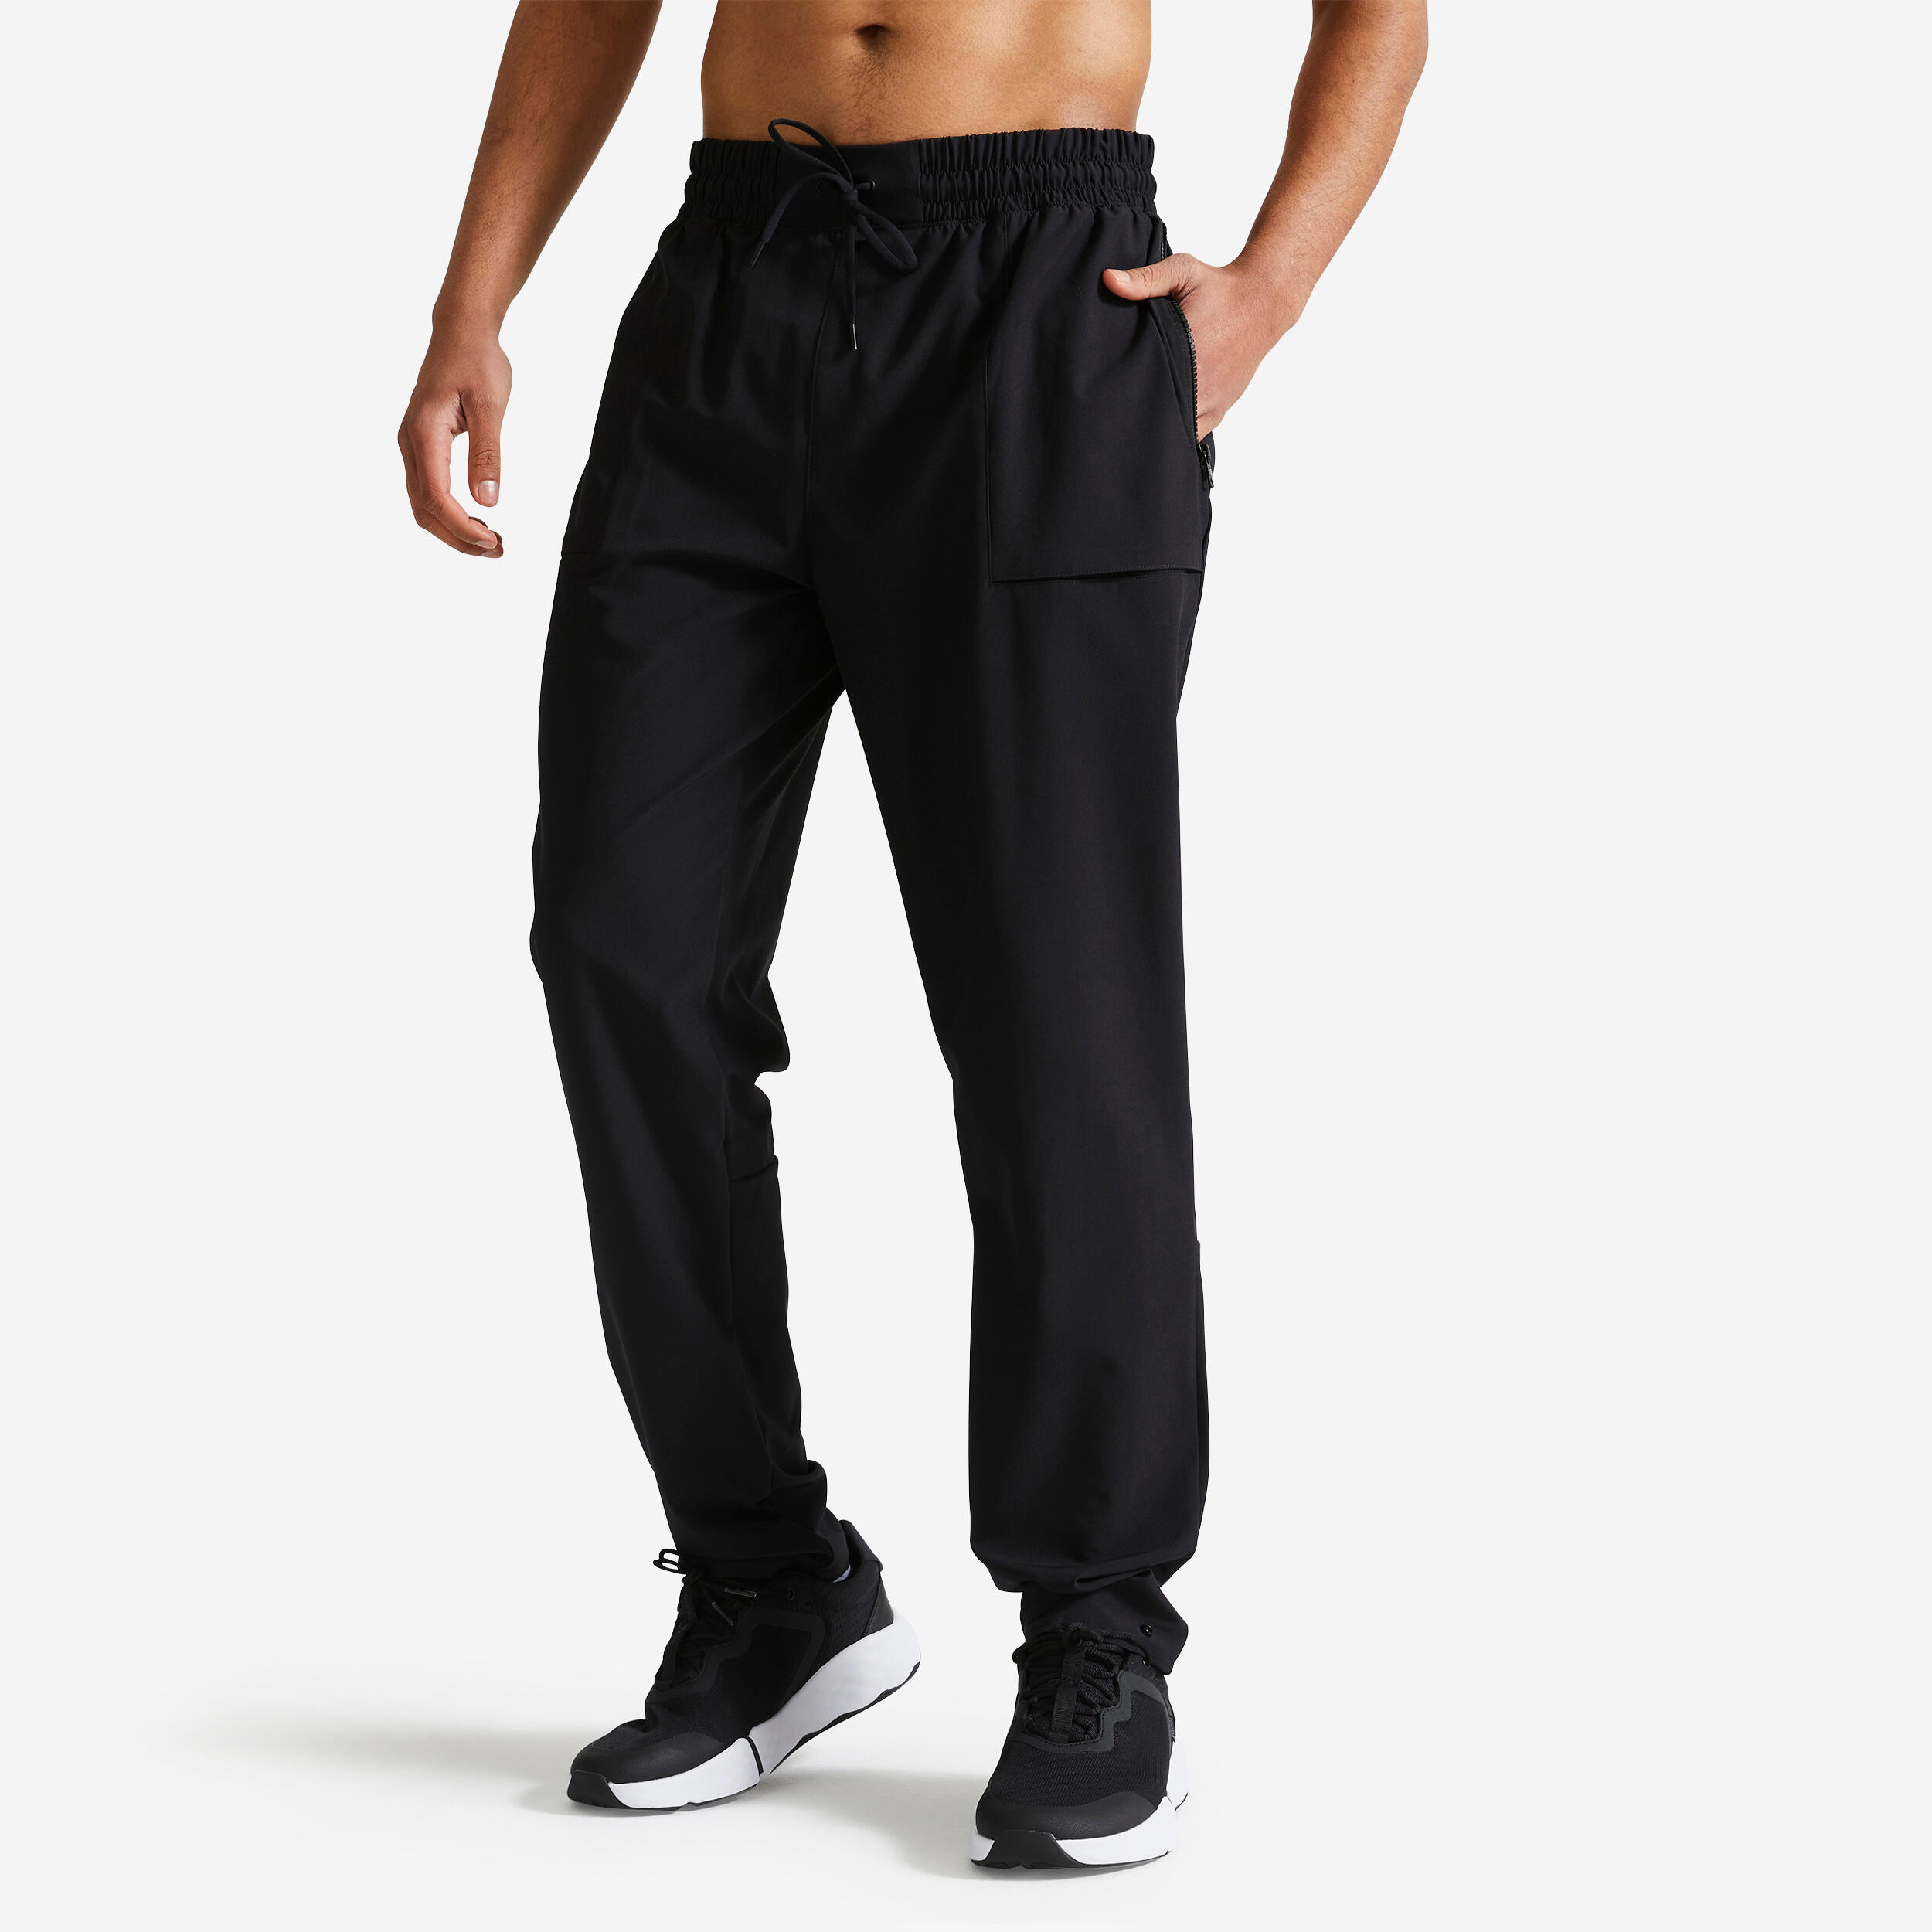 Men's Breathable Fitness Collection Bottoms - Black 1/7